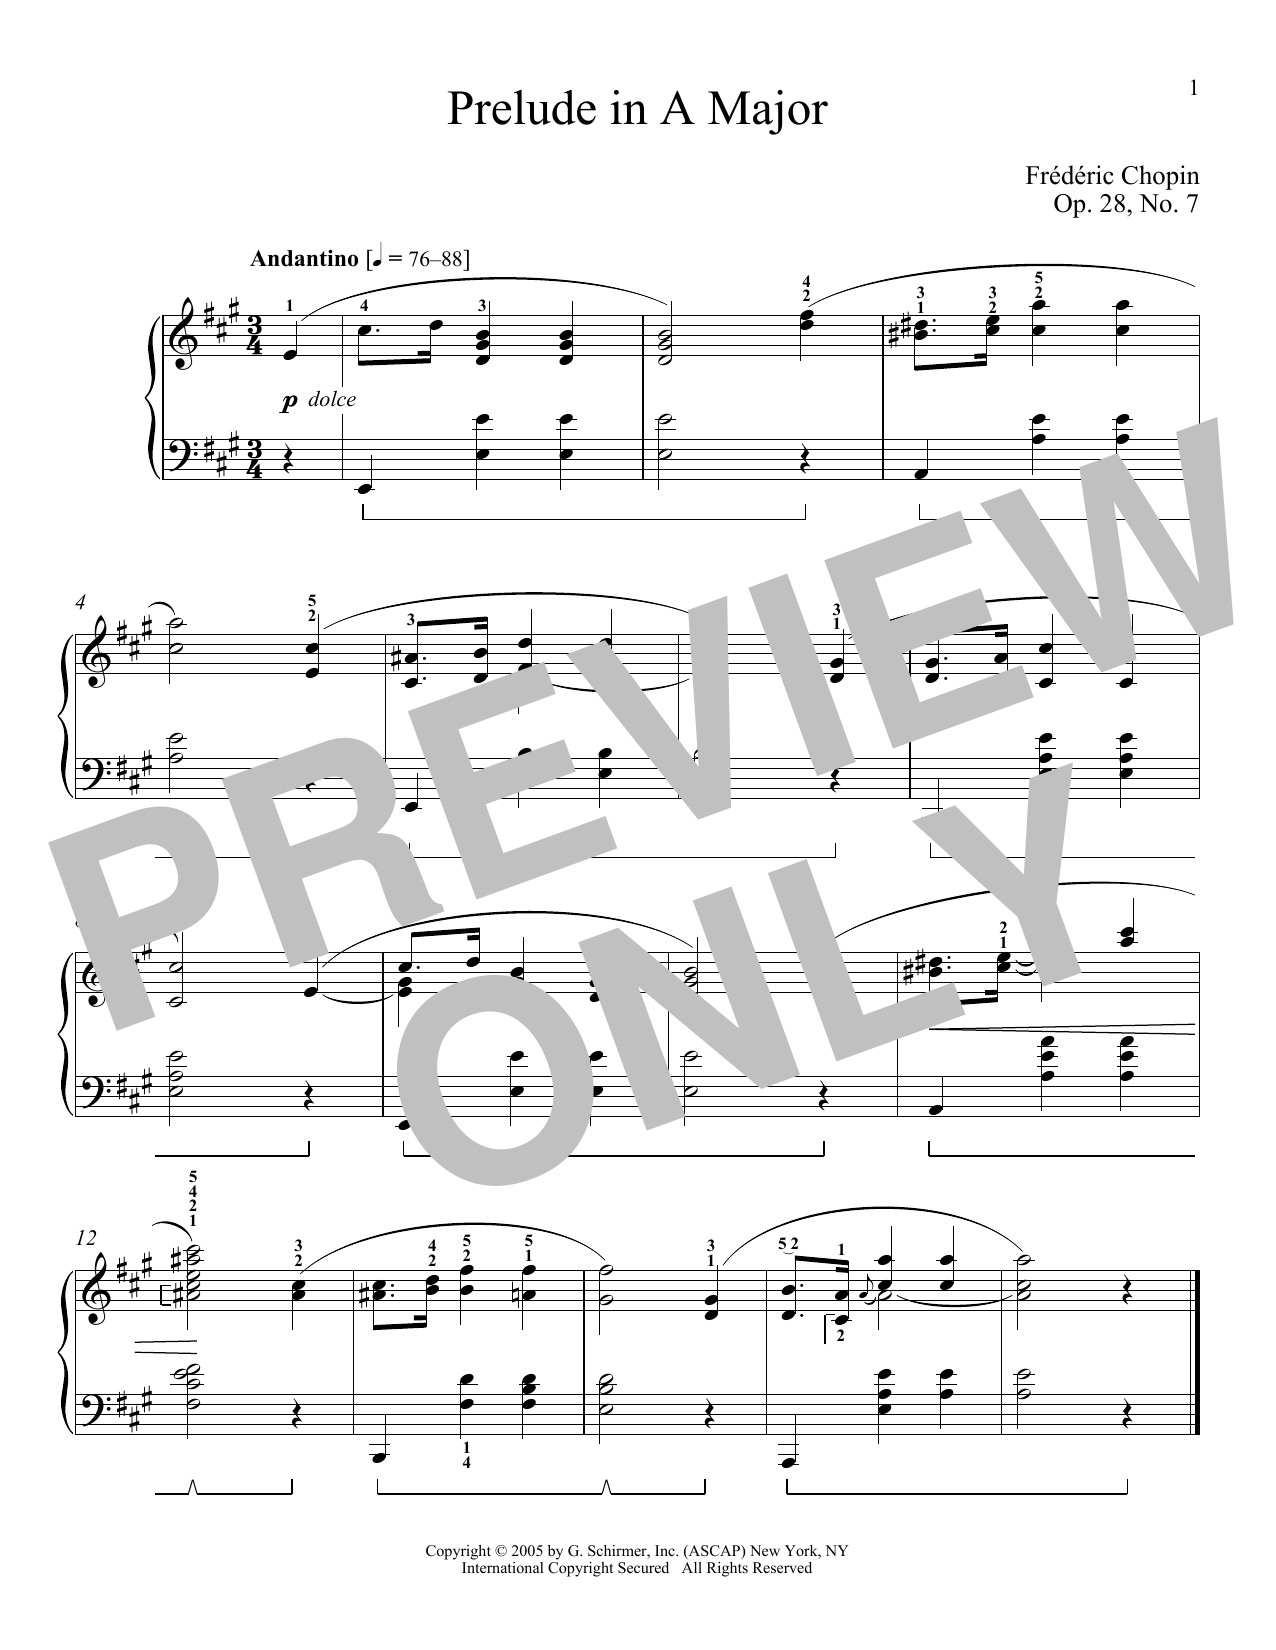 Download Frederic Chopin Prelude In A Major, Op. 28, No. 7 Sheet Music